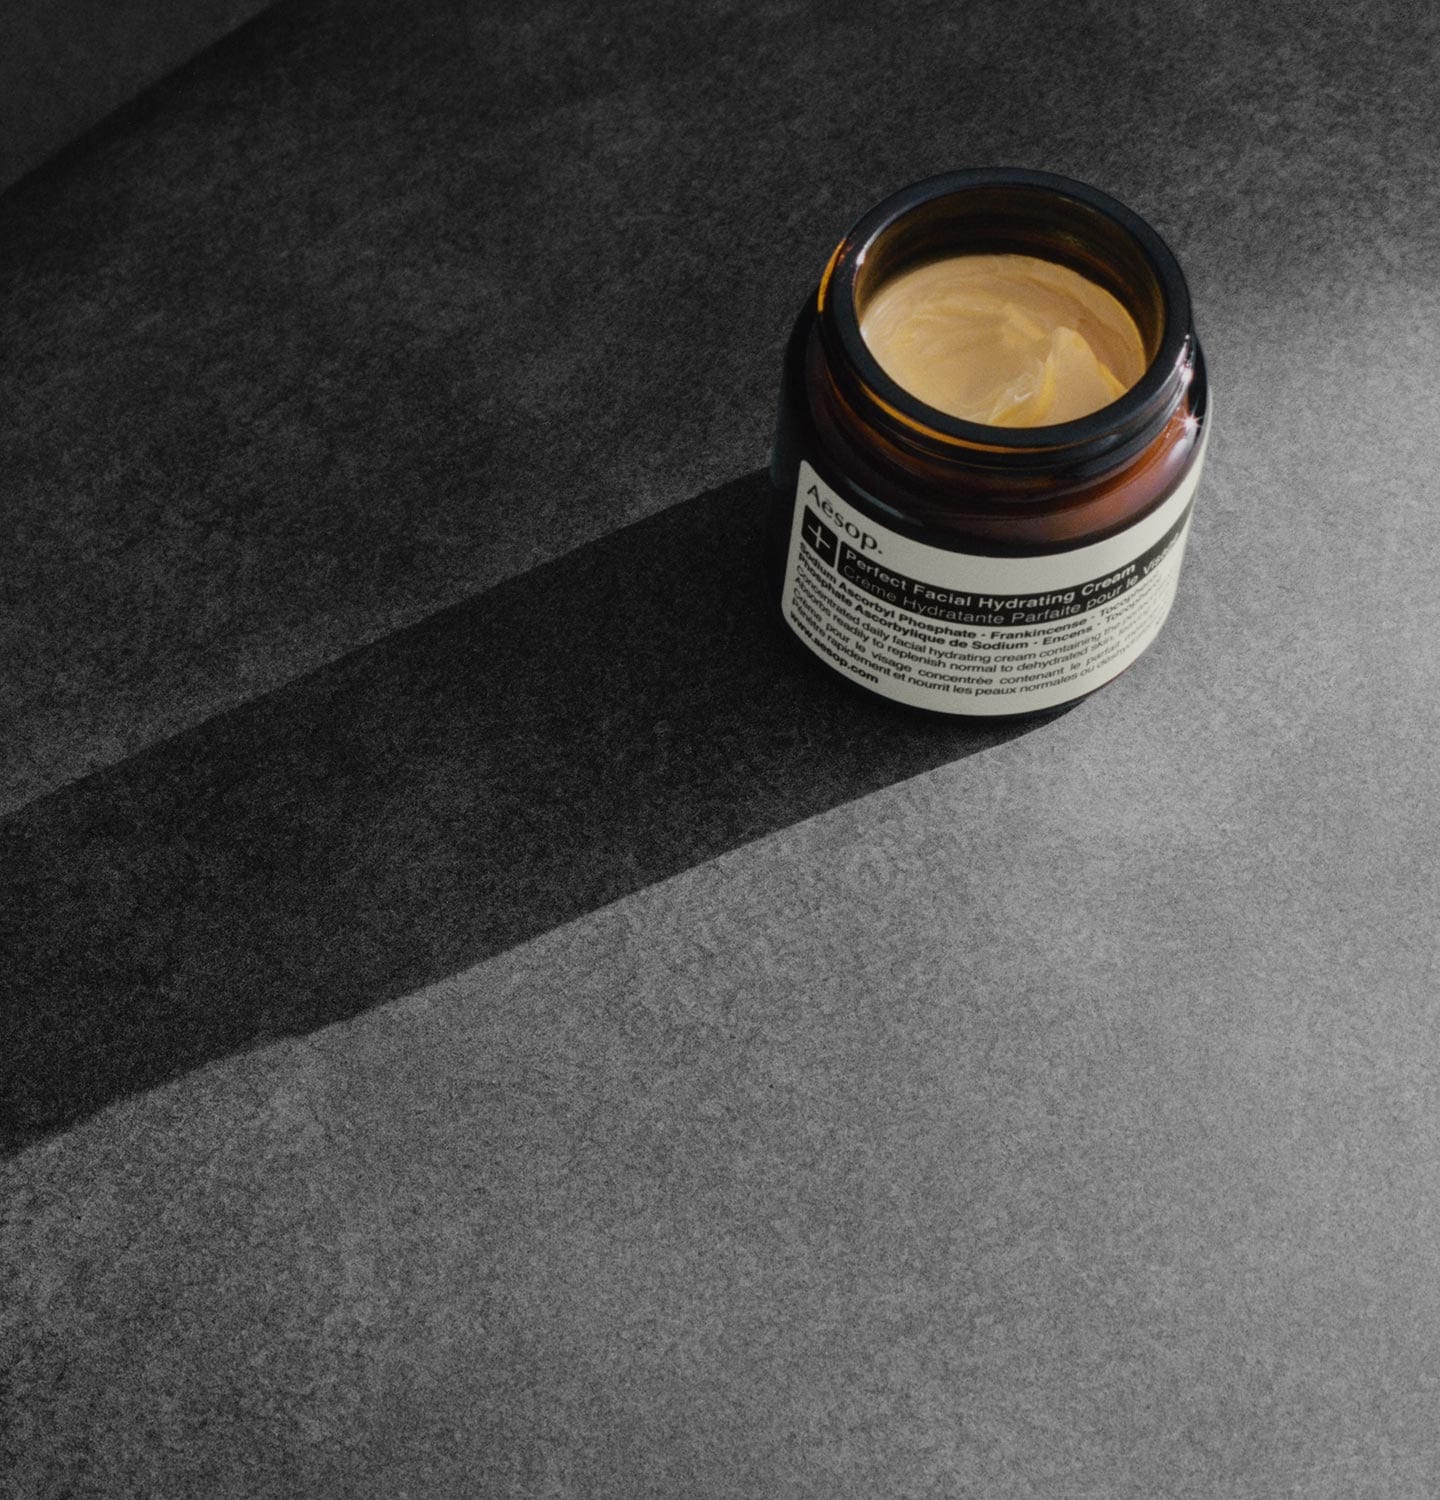 A jar of Perfect Facial Hydrating Cream sits open on a concrete surface to reveal a smooth, buttery cream. 